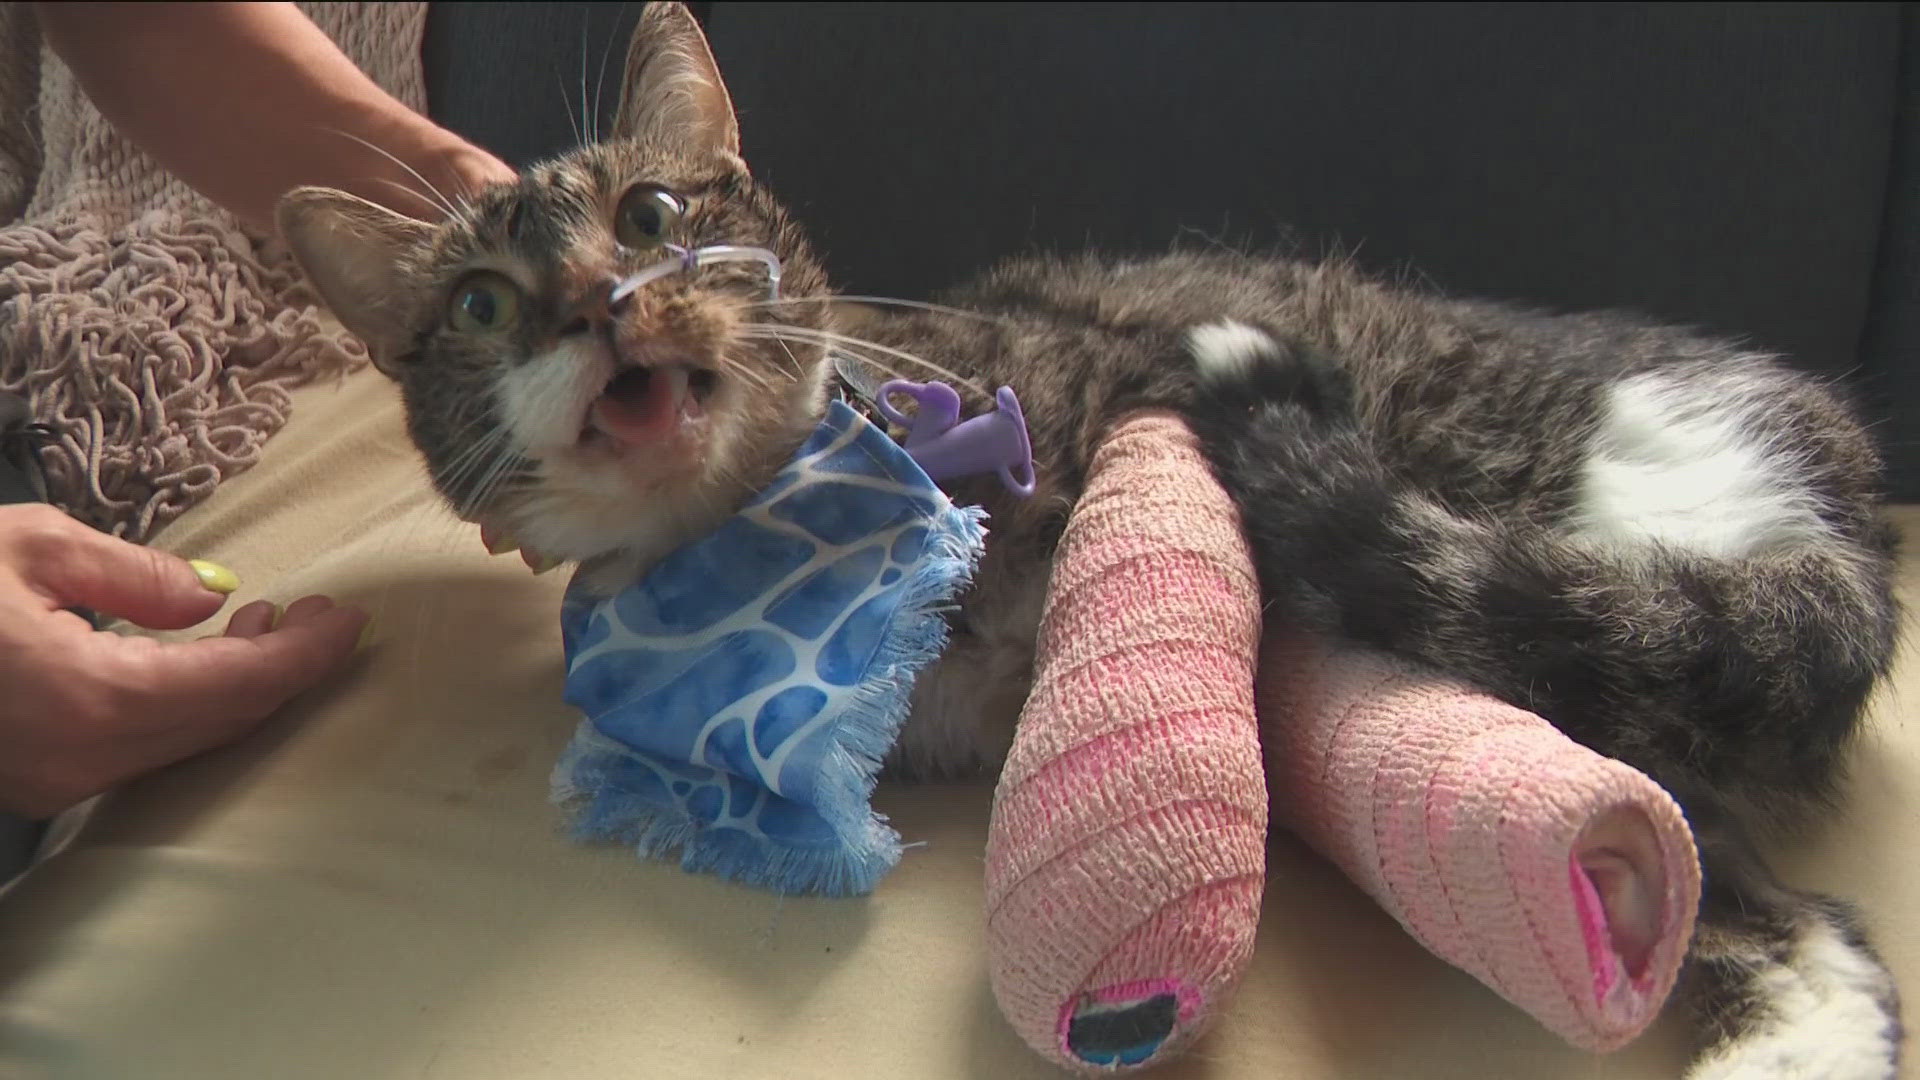 Witnesses say it appeared the tiny cat was tossed from 12 stories up. Now an animal sanctuary is nursing the cat named Rue back to health.